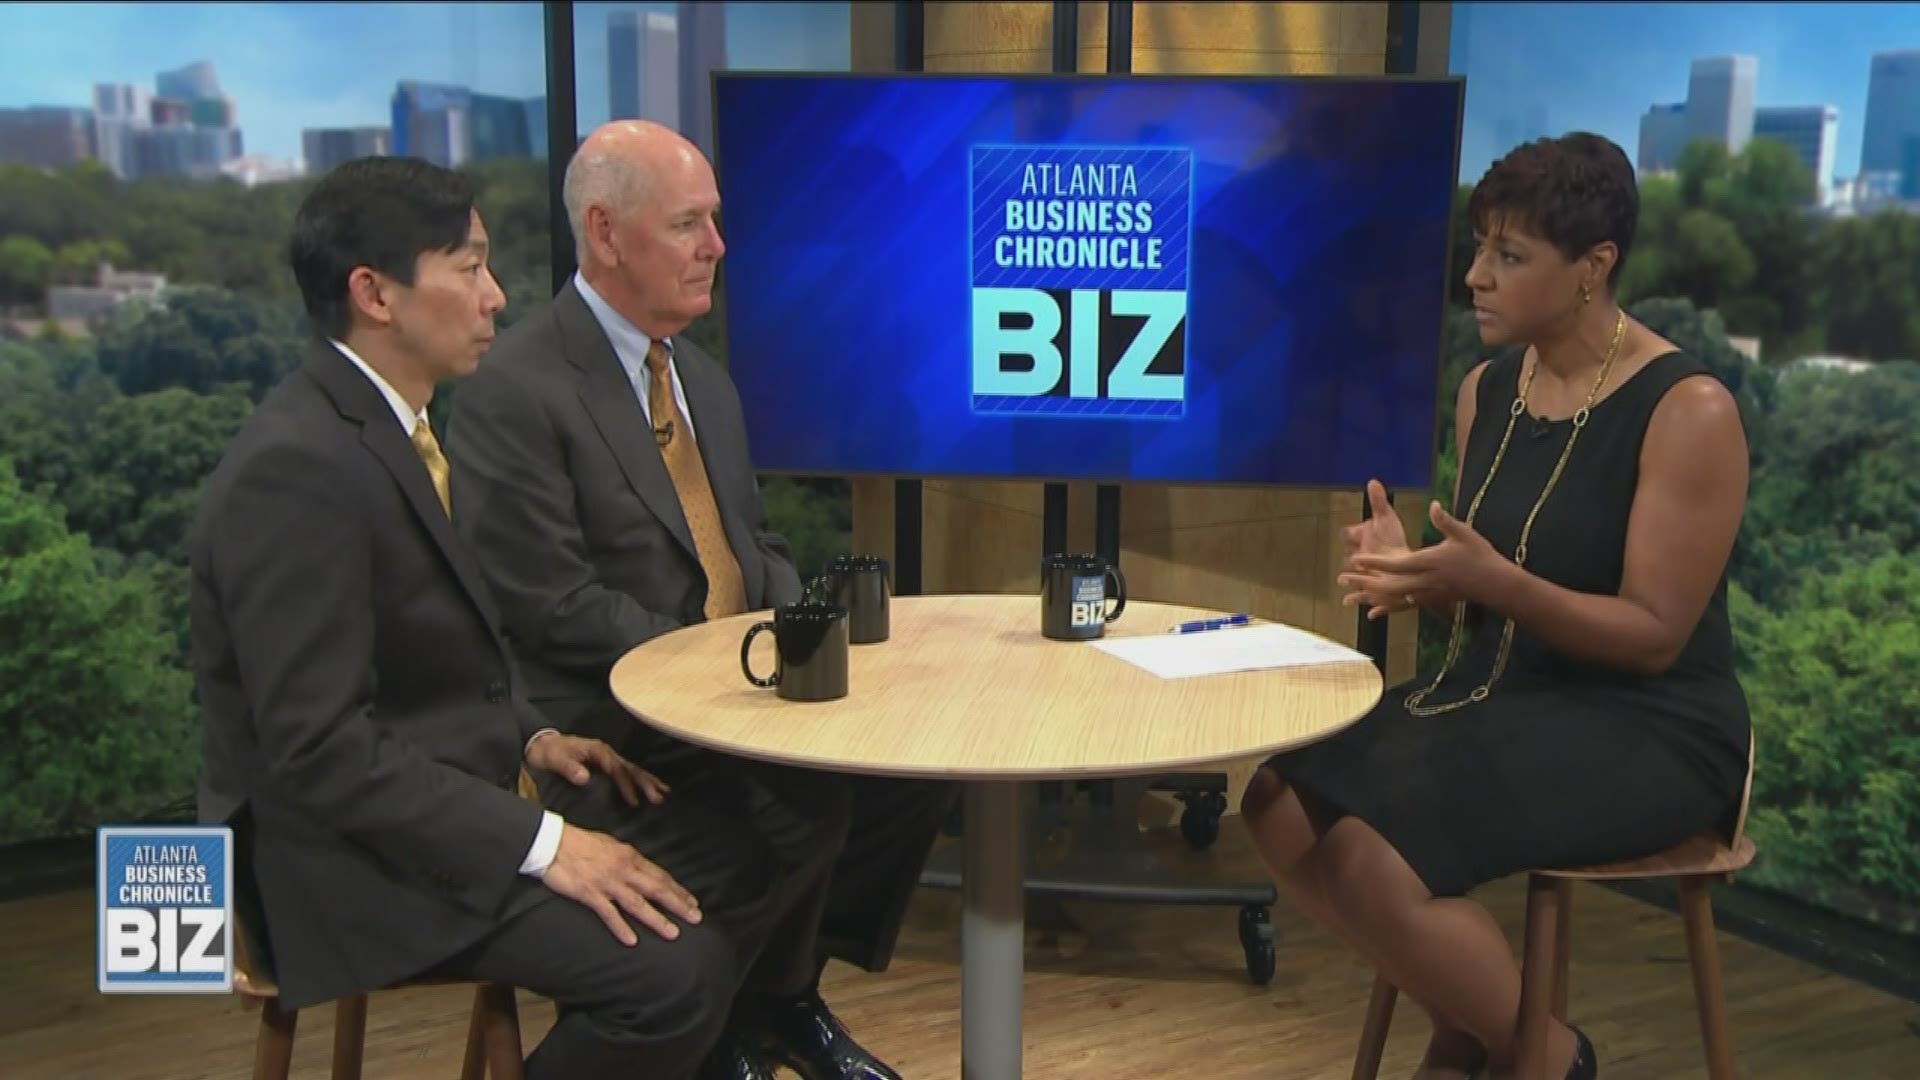 Crystal Edmonson discusses the impact of the potential 25% tariffs on $300B worth of Chinese imports... with the Georgia Association of Manufacturers and the Georgia China Alliance on 'Atlanta Business Chronicle's BIZ'